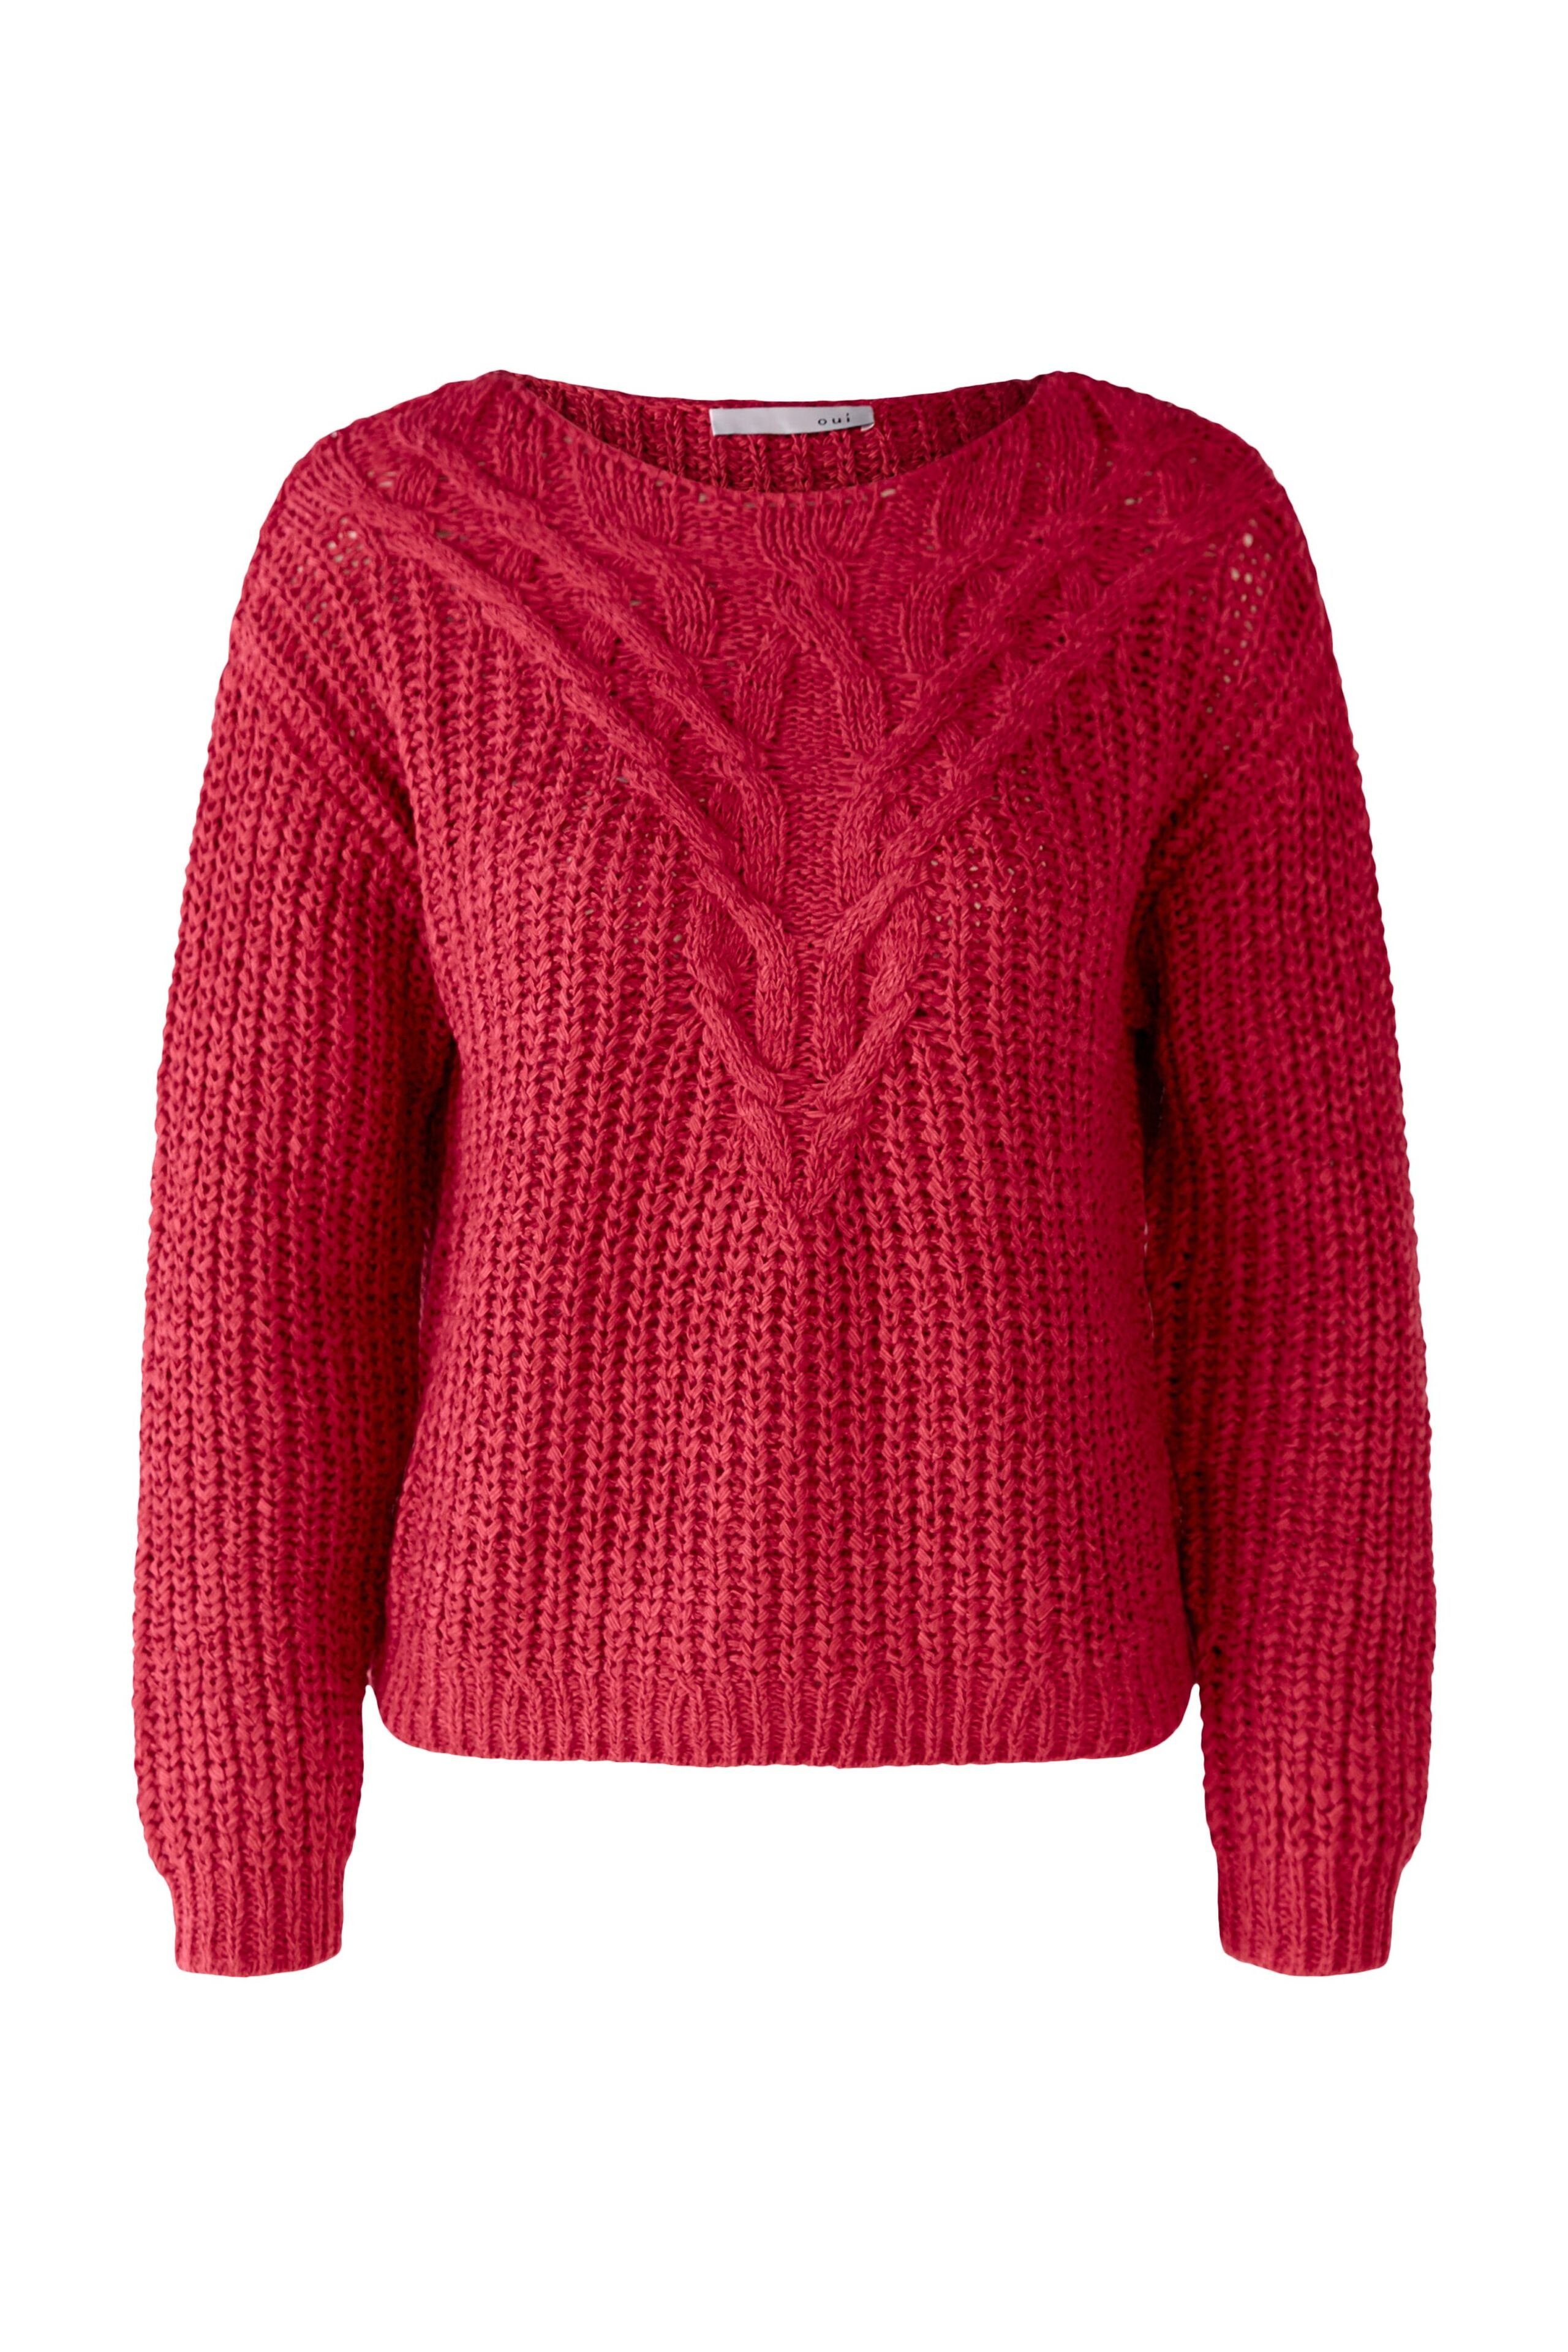 Strickpullover Zopfmuster Oui red Pullover mit